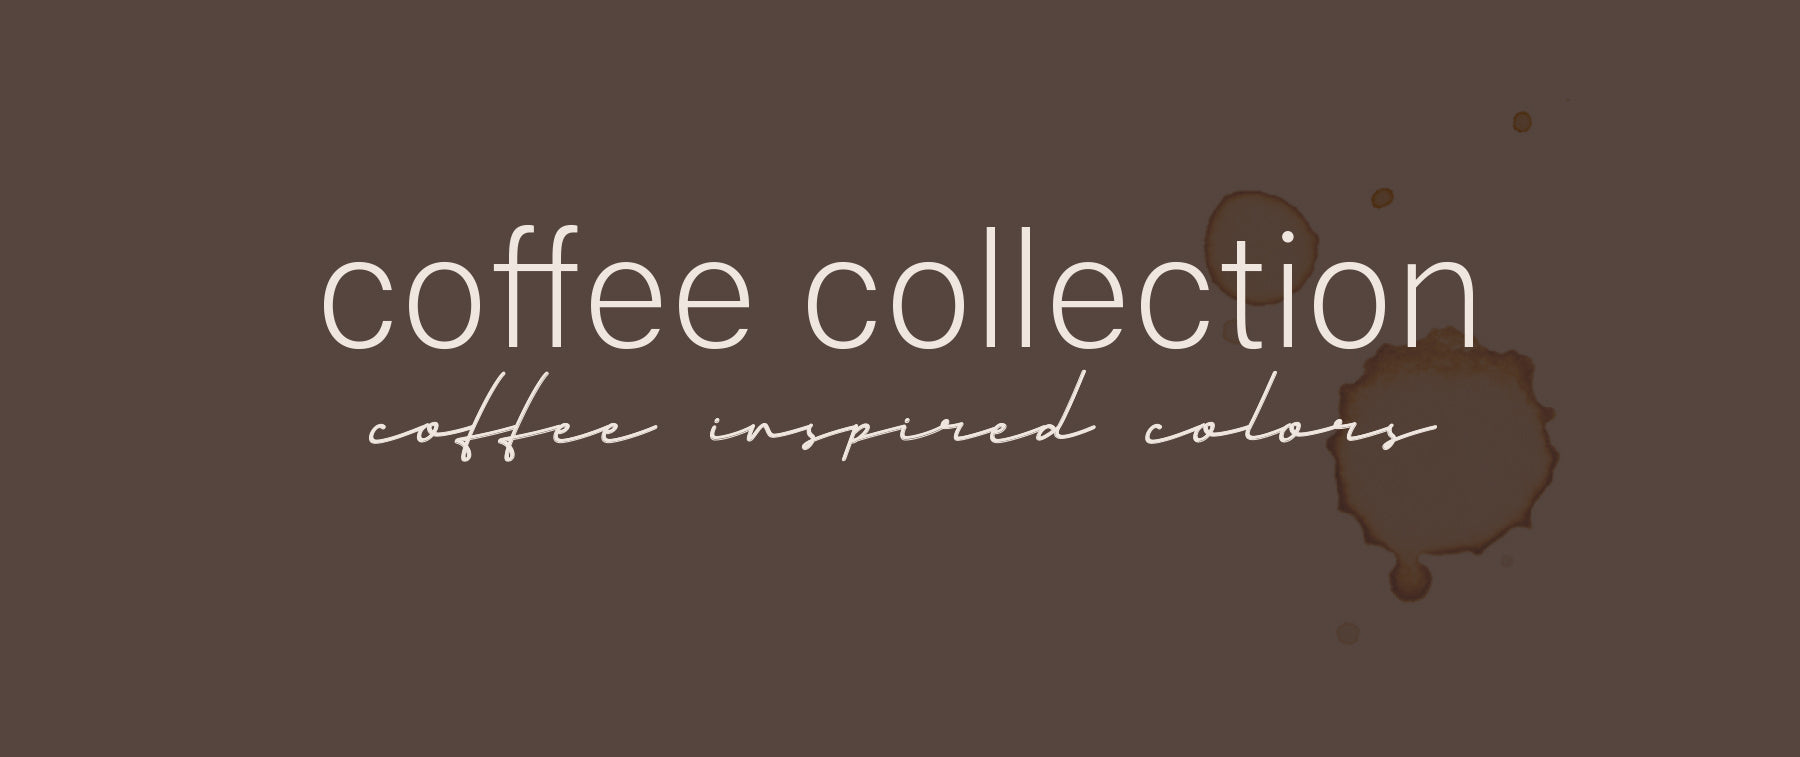 COFFEE COLLECTION BY ESTETICA